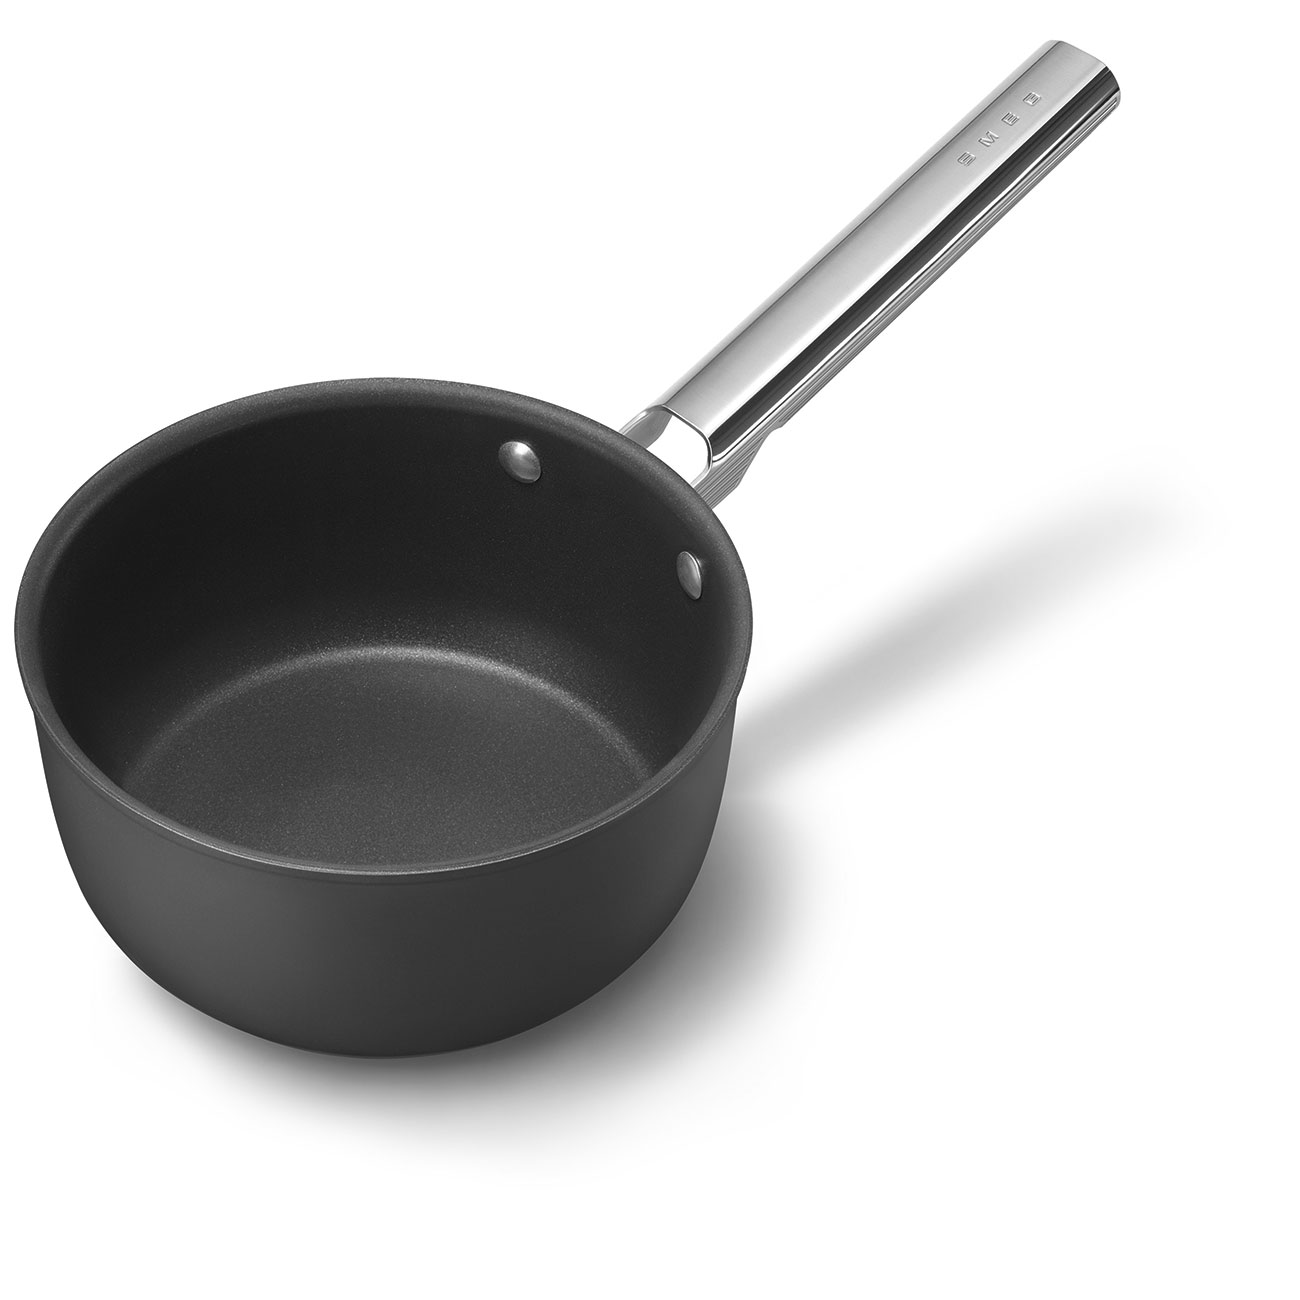 Smeg Black Non-stick Saucepan with glass lid and stainless steel handle_11